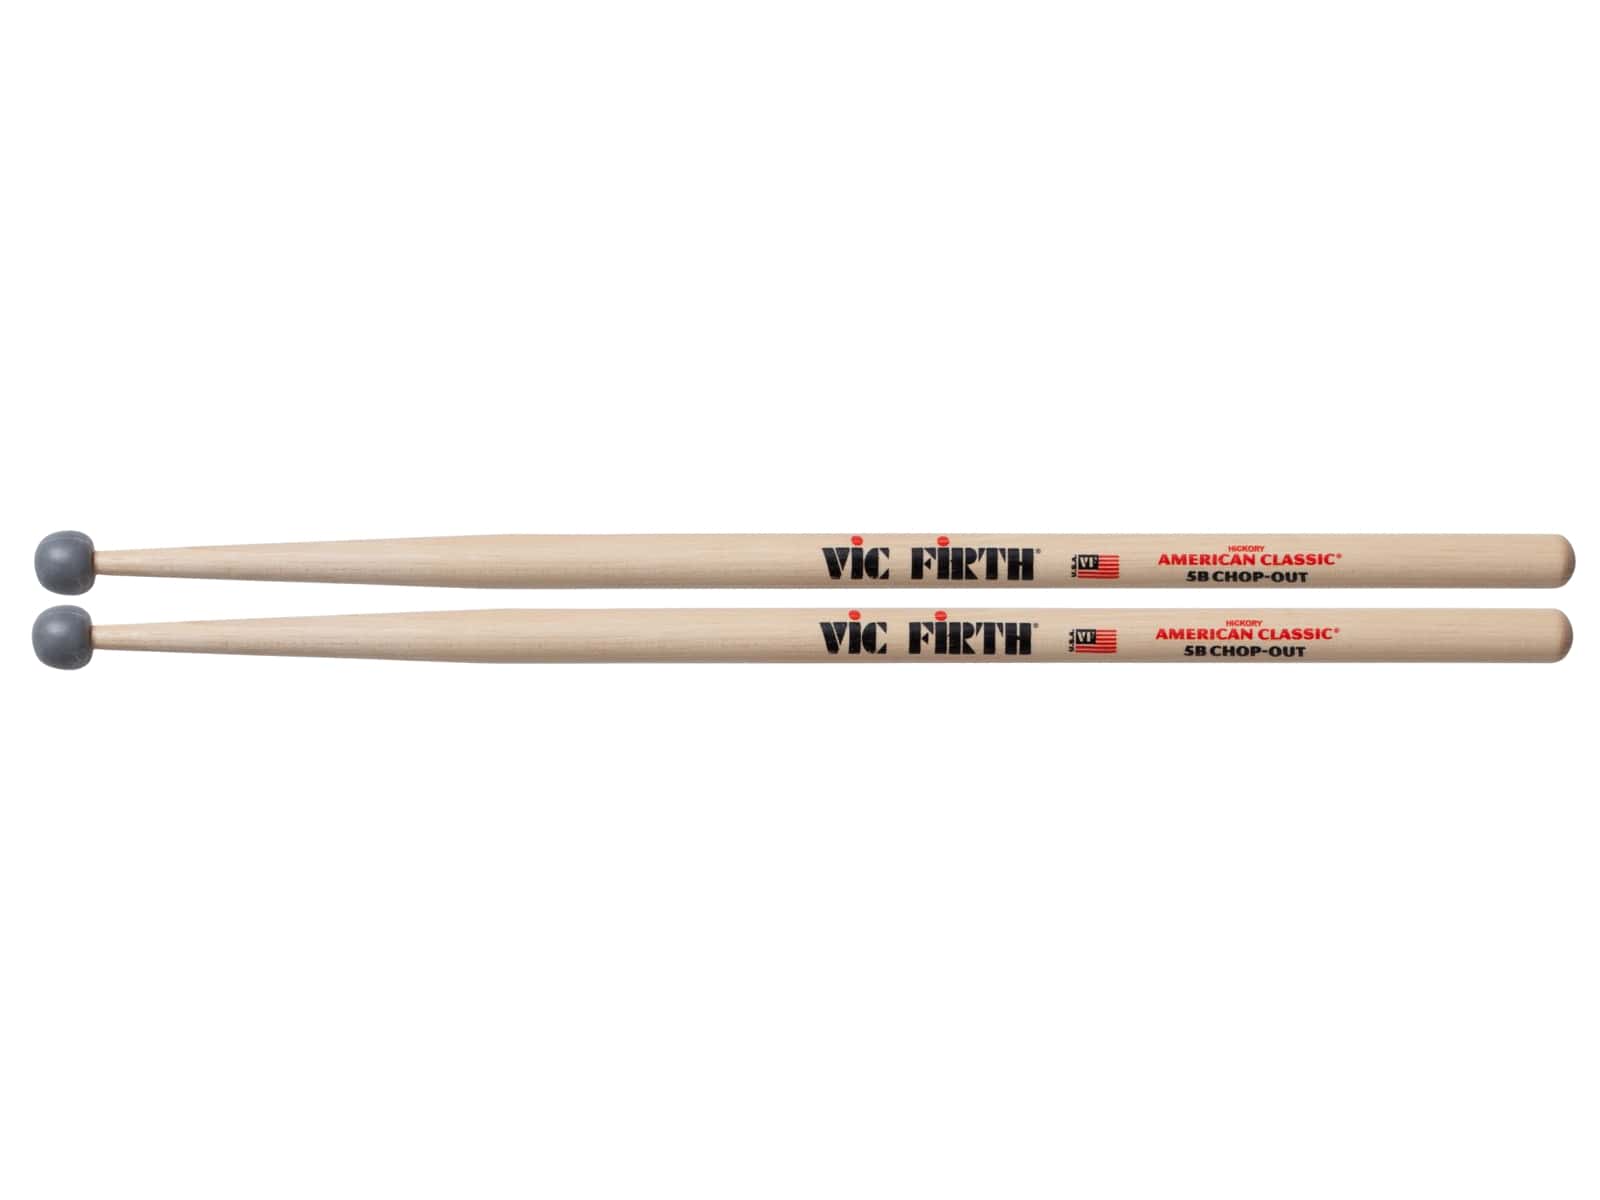 VIC FIRTH 5B CHOP-OUT PRACTICE STICKS